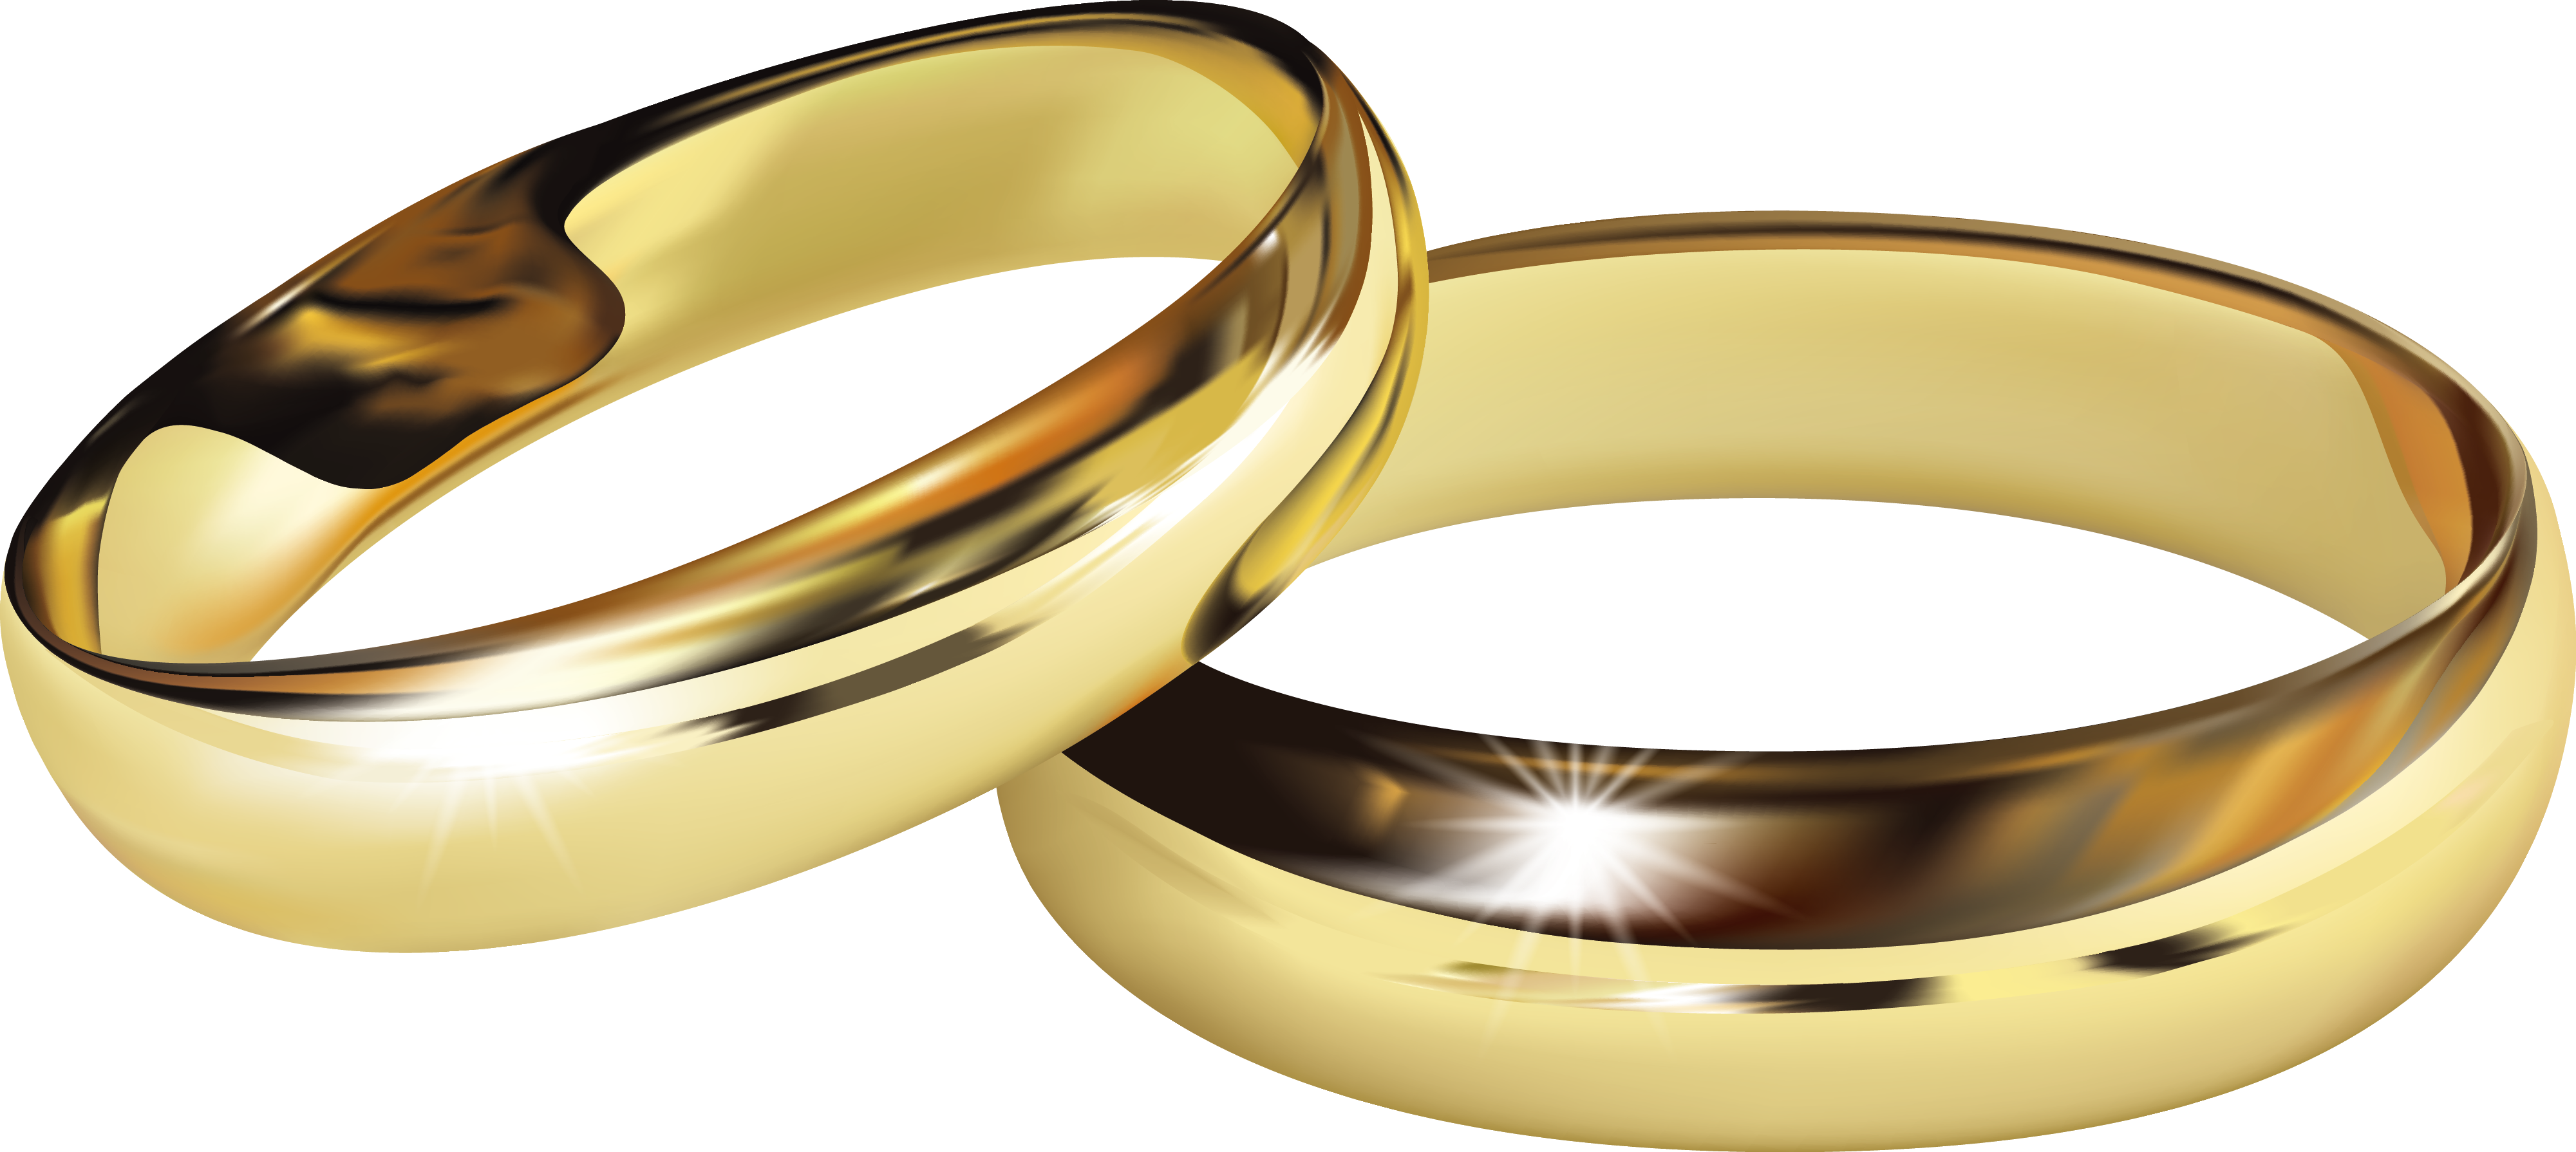 Wedding Ring PNG Clipart, Jewelry Ring PNG Images Free.